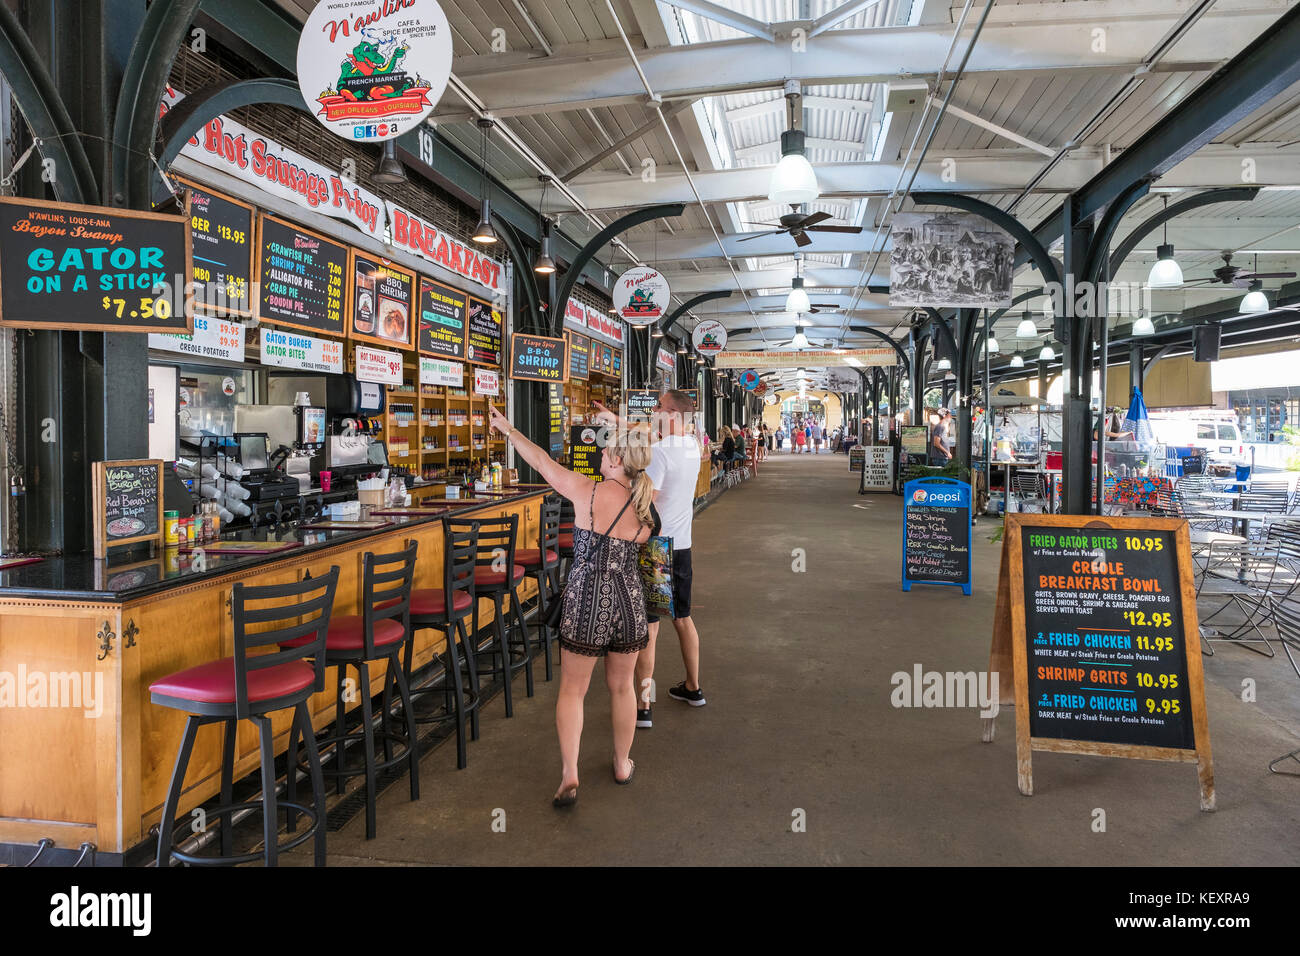 United States, Louisiana, New Orleans, French Quarter. French Market shops and farmer's market. Stock Photo